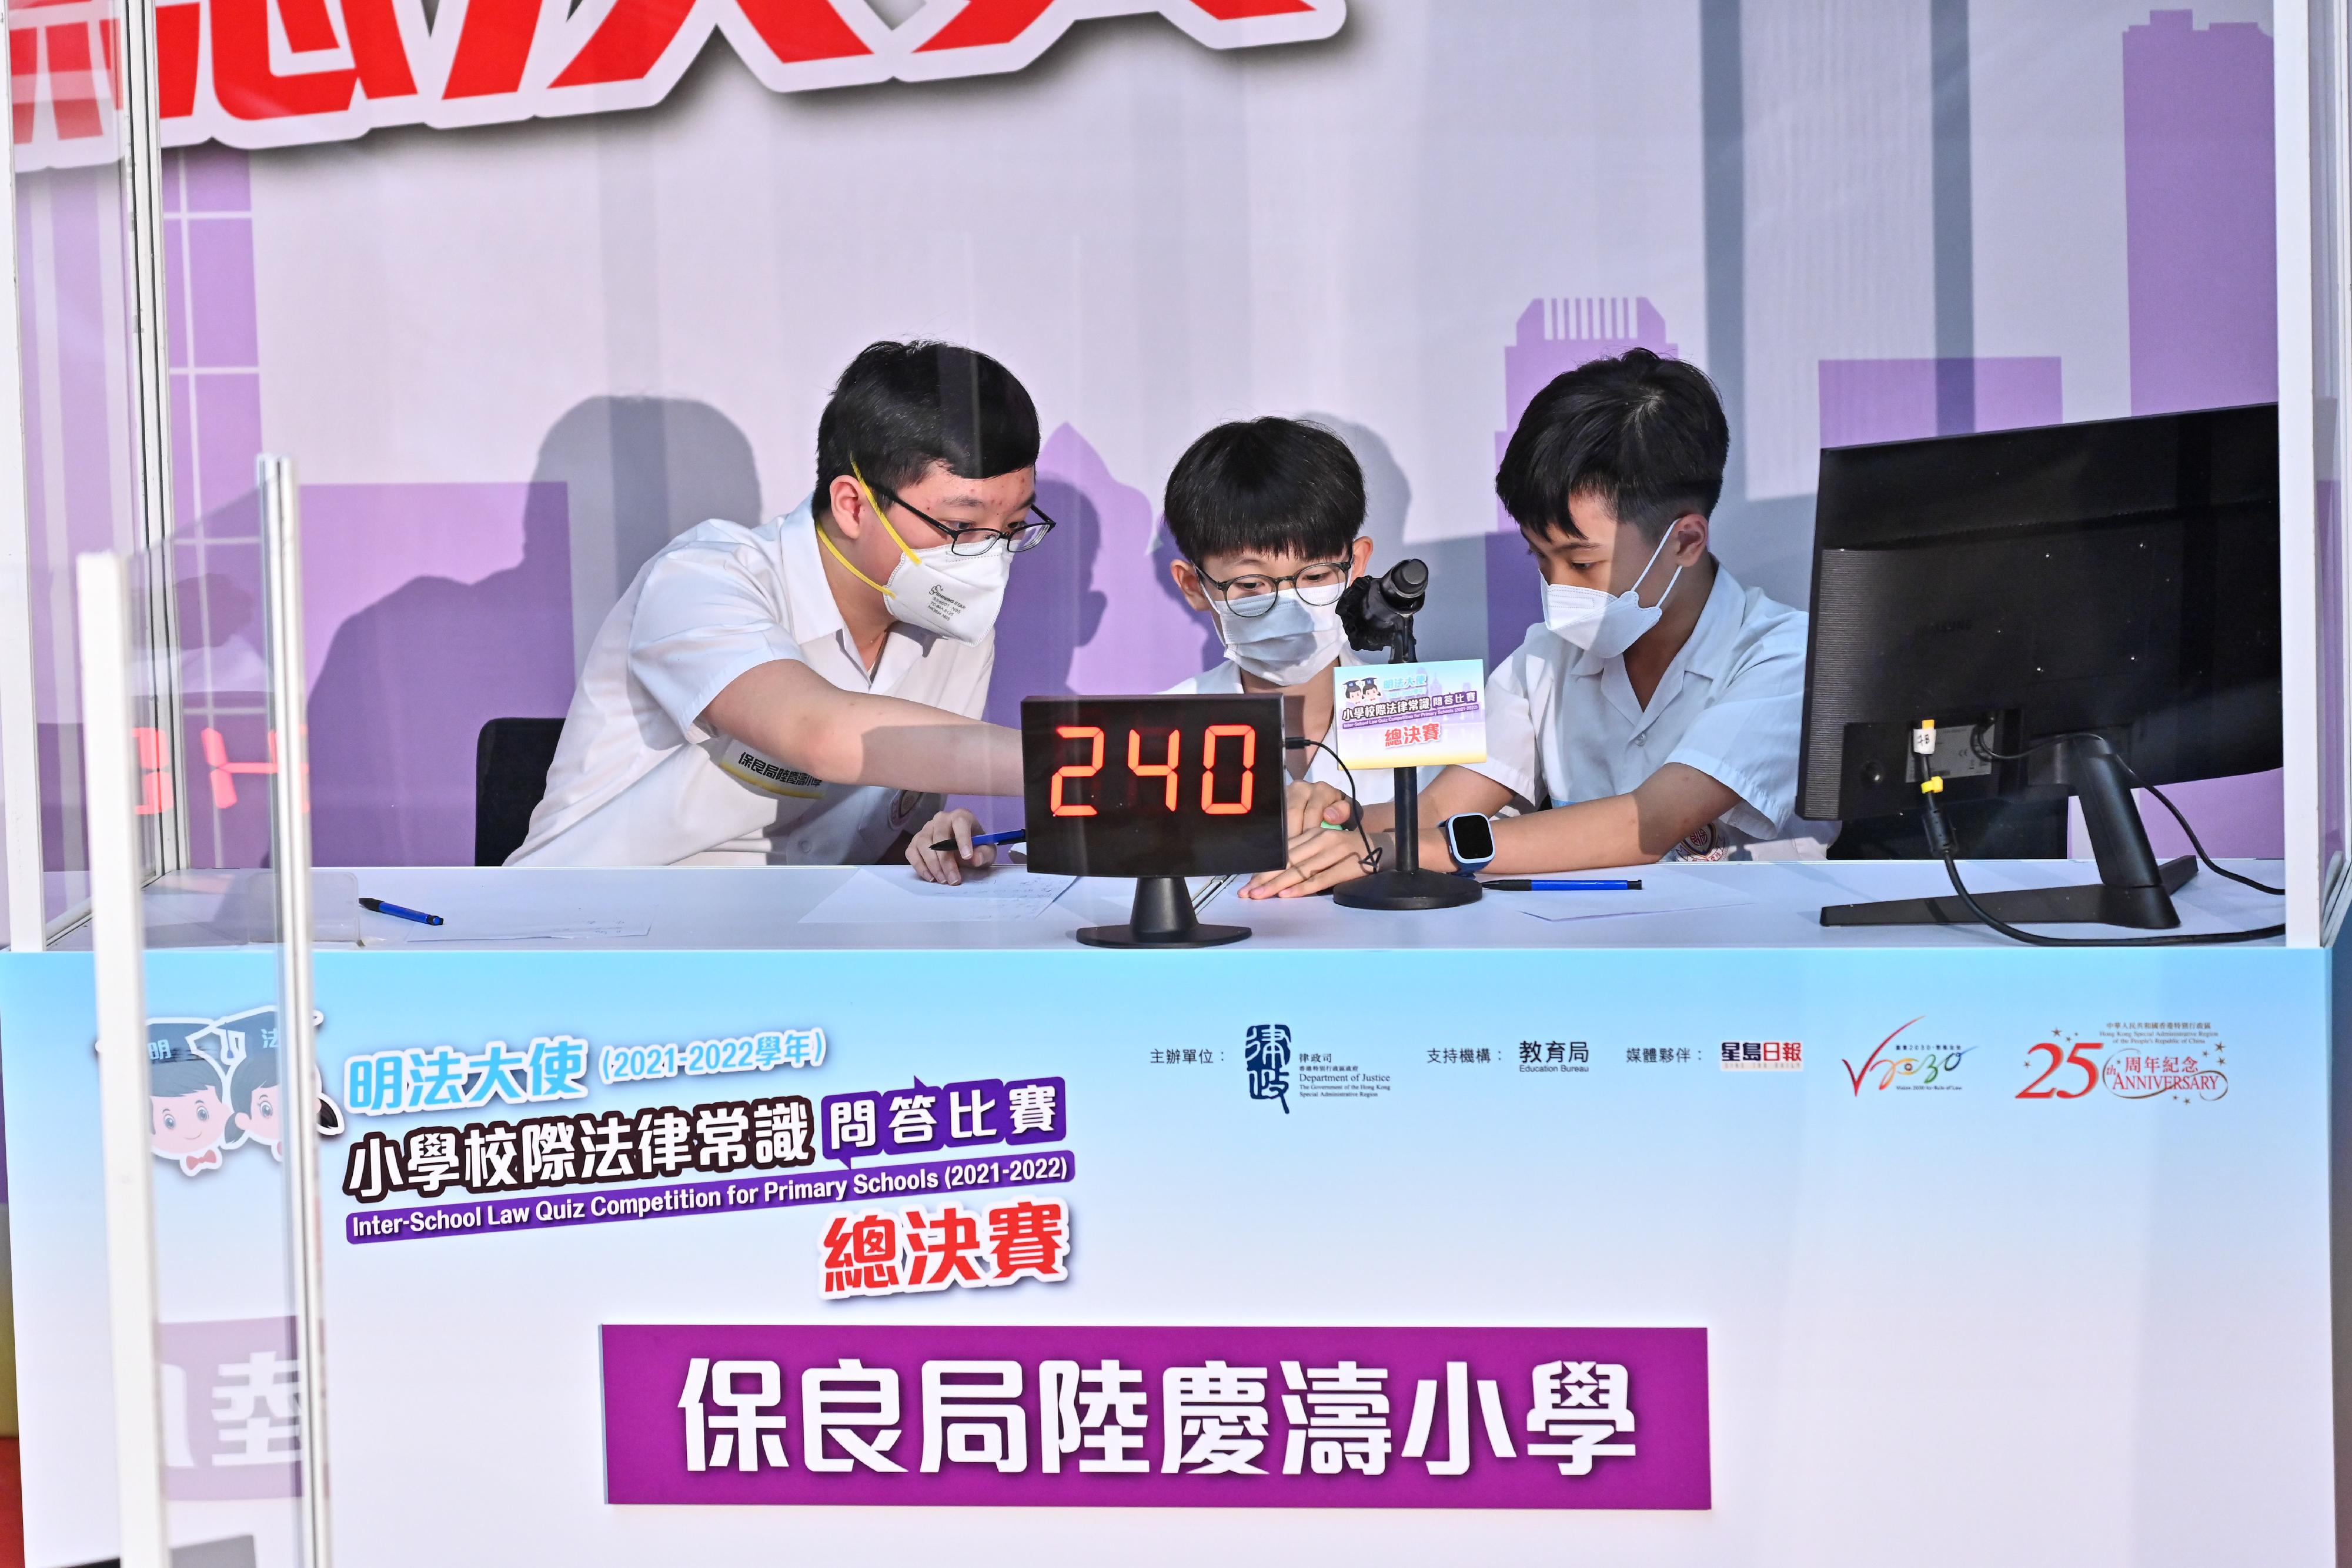 The Grand Final of the Inter-School Law Quiz Competition for primary school students, organised by the Department of Justice and supported by the Education Bureau, was successfully held today (June 27) at the M+ museum. Photo shows a participating team engaging in the competition.